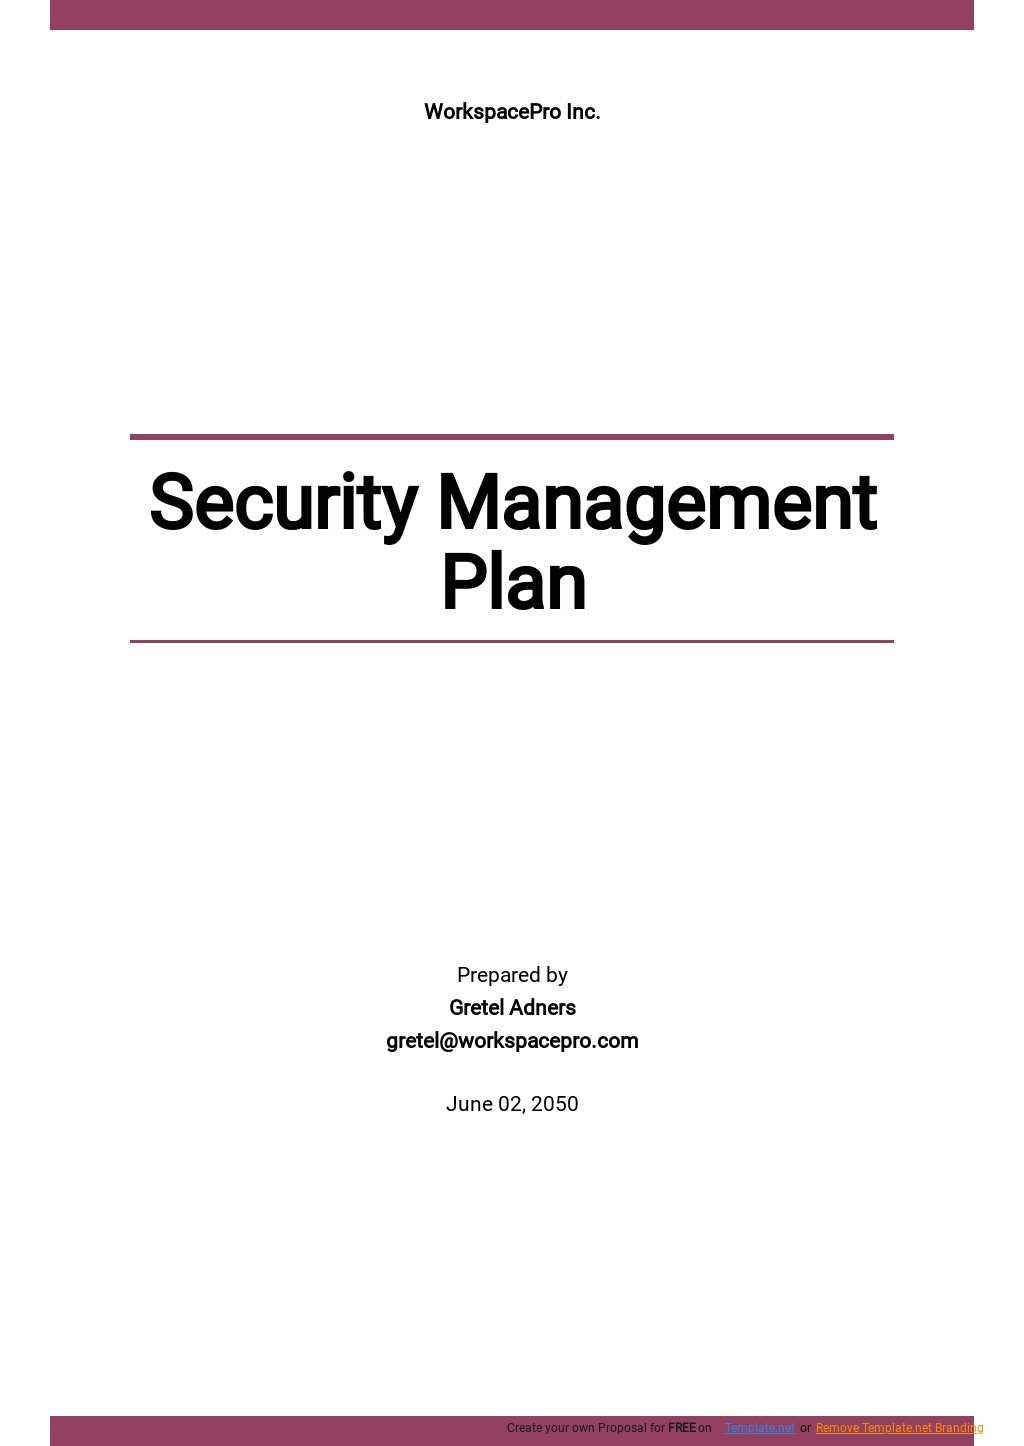 Free Sample Security Management Plan Template